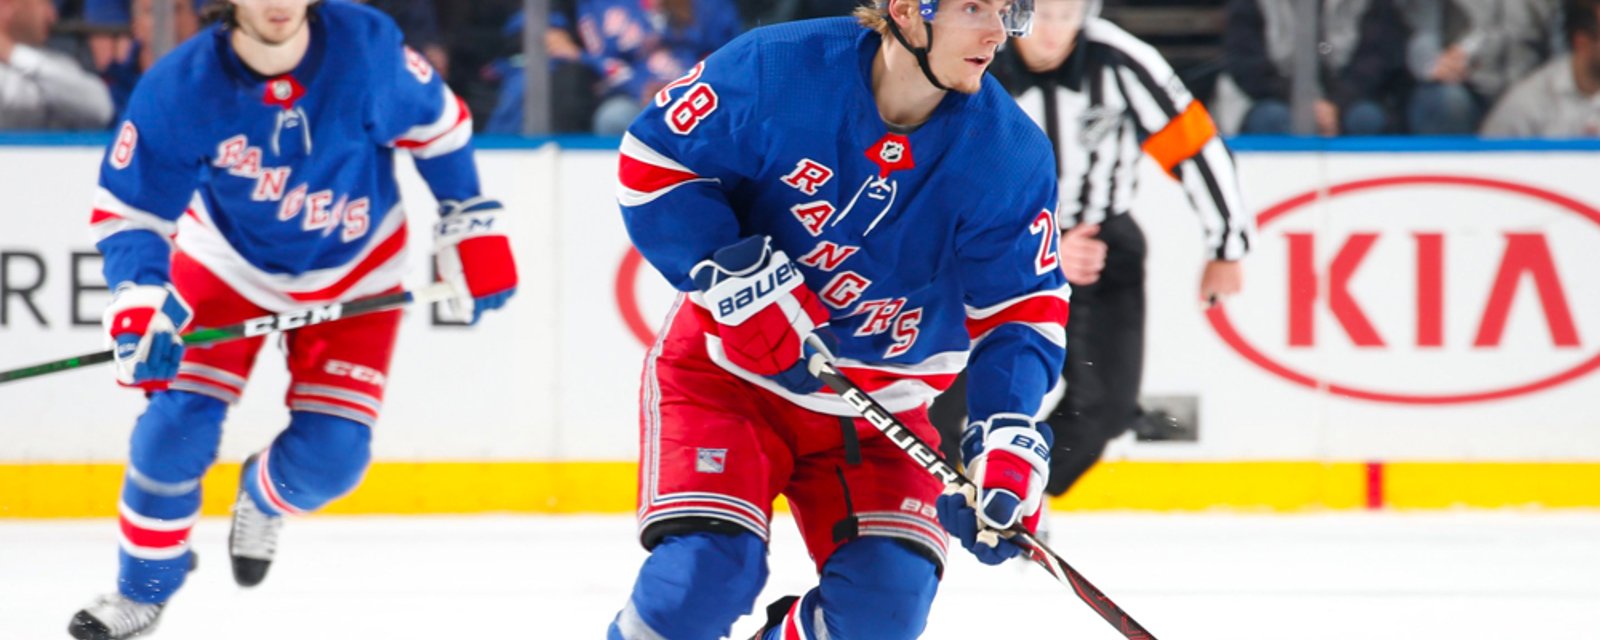 Lias Andersson staying in Sweden, won’t return to Rangers organization